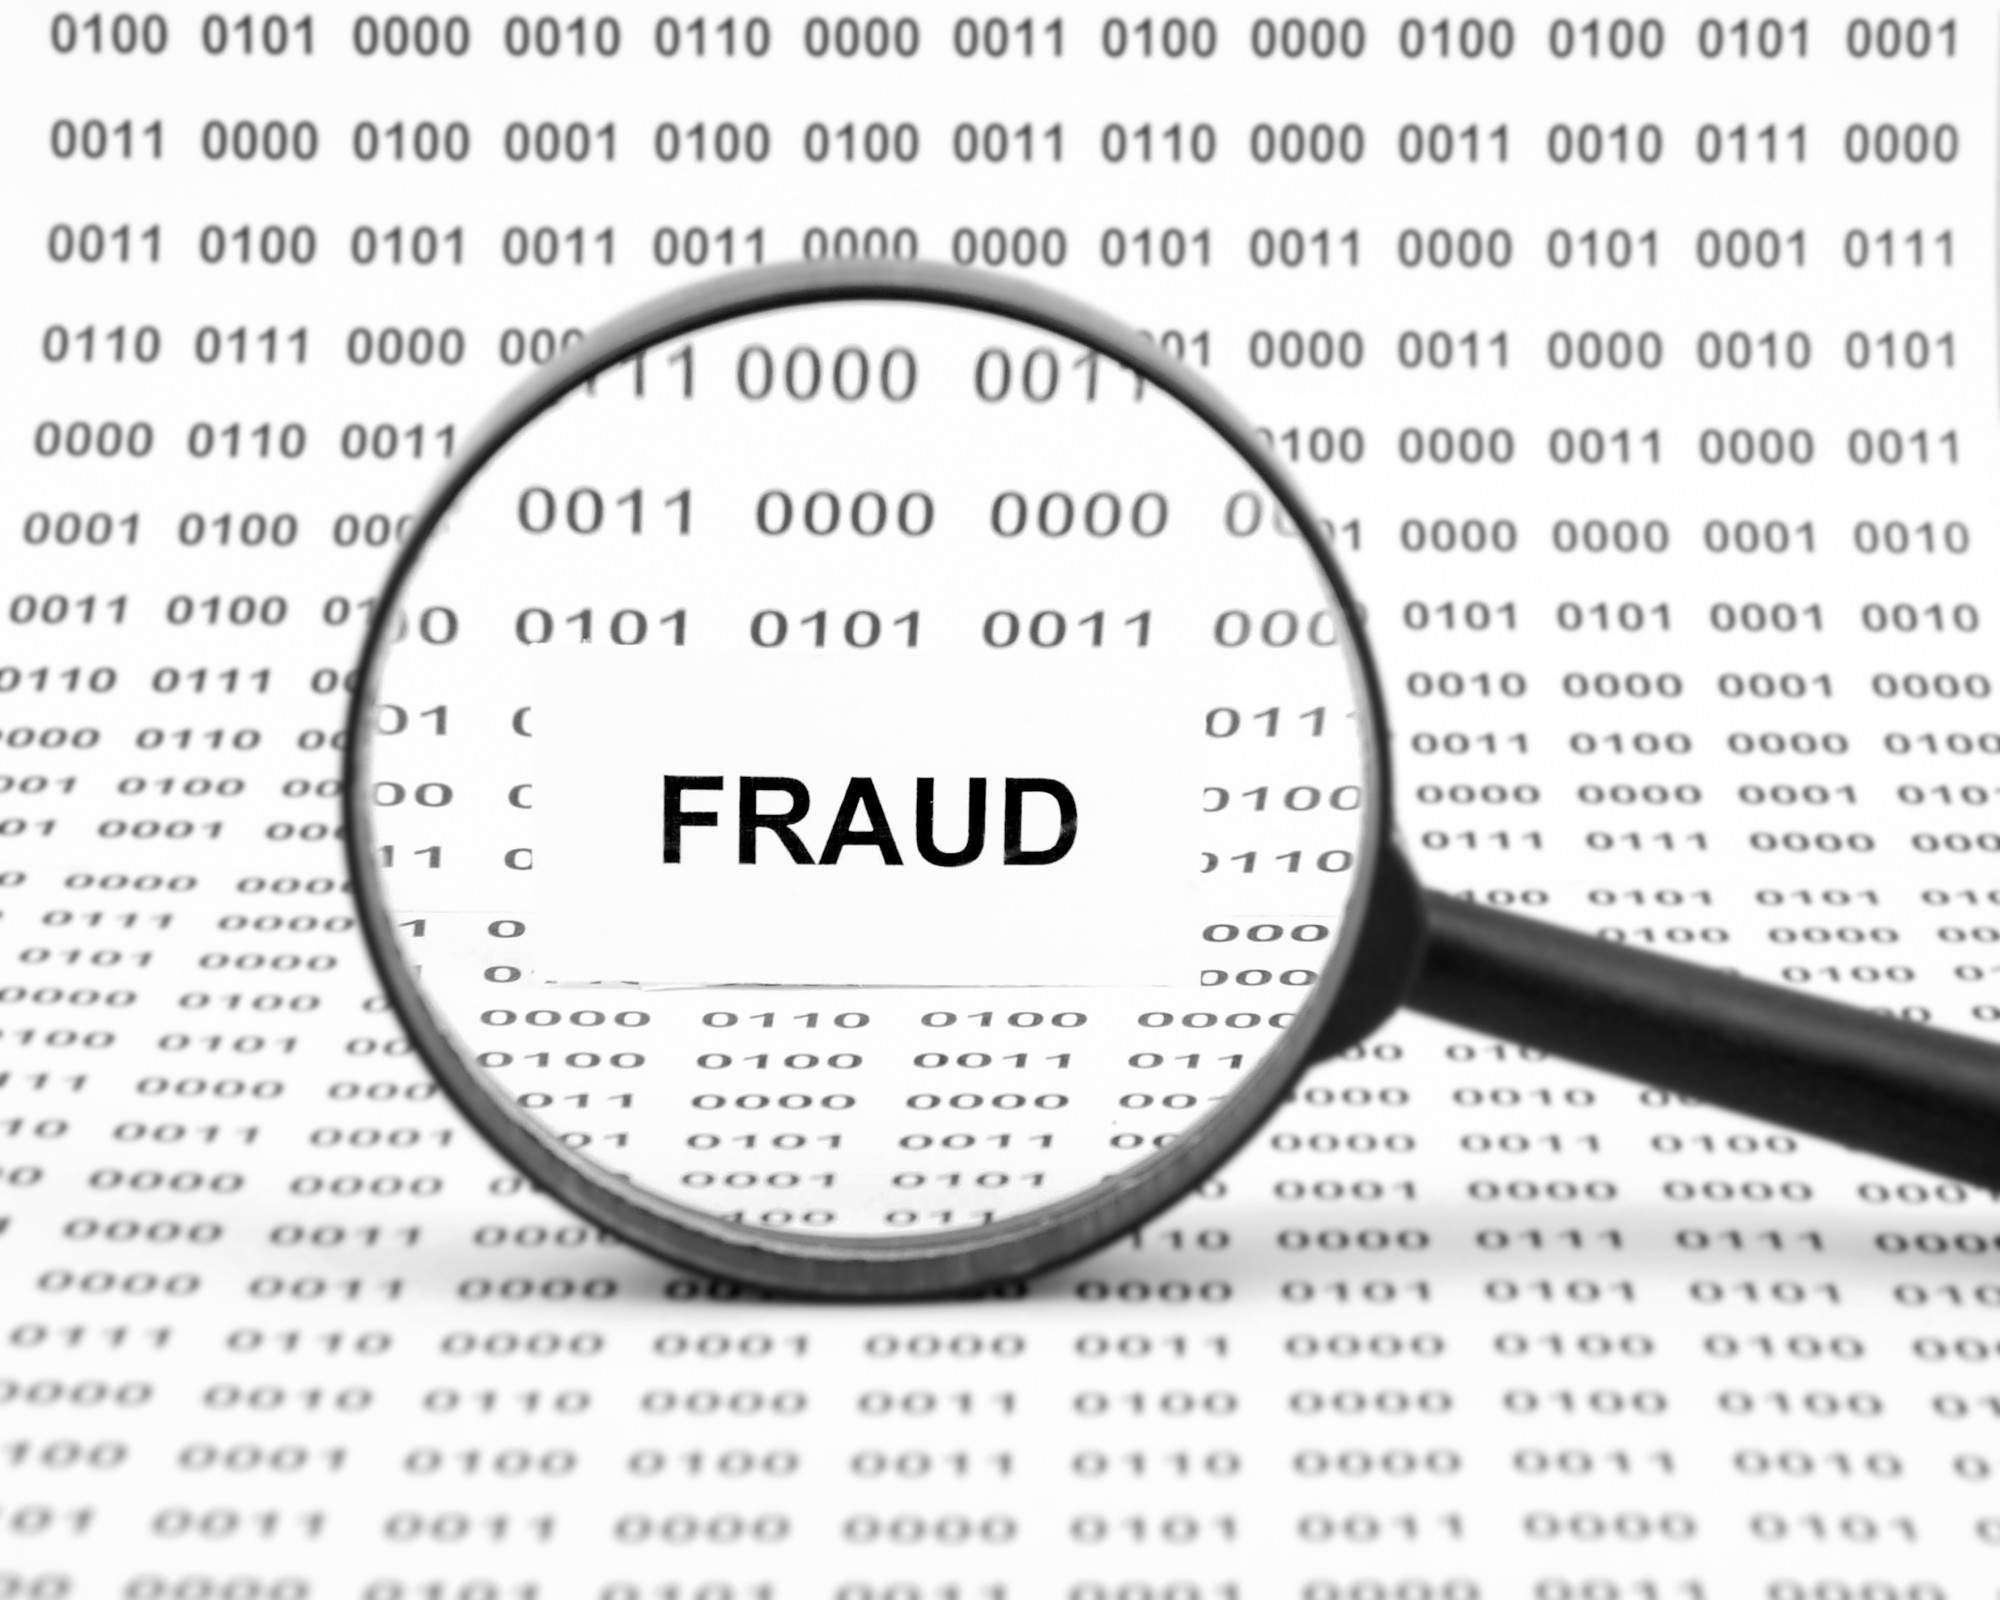 Types of Bank Fraud That Affect Business Accounts